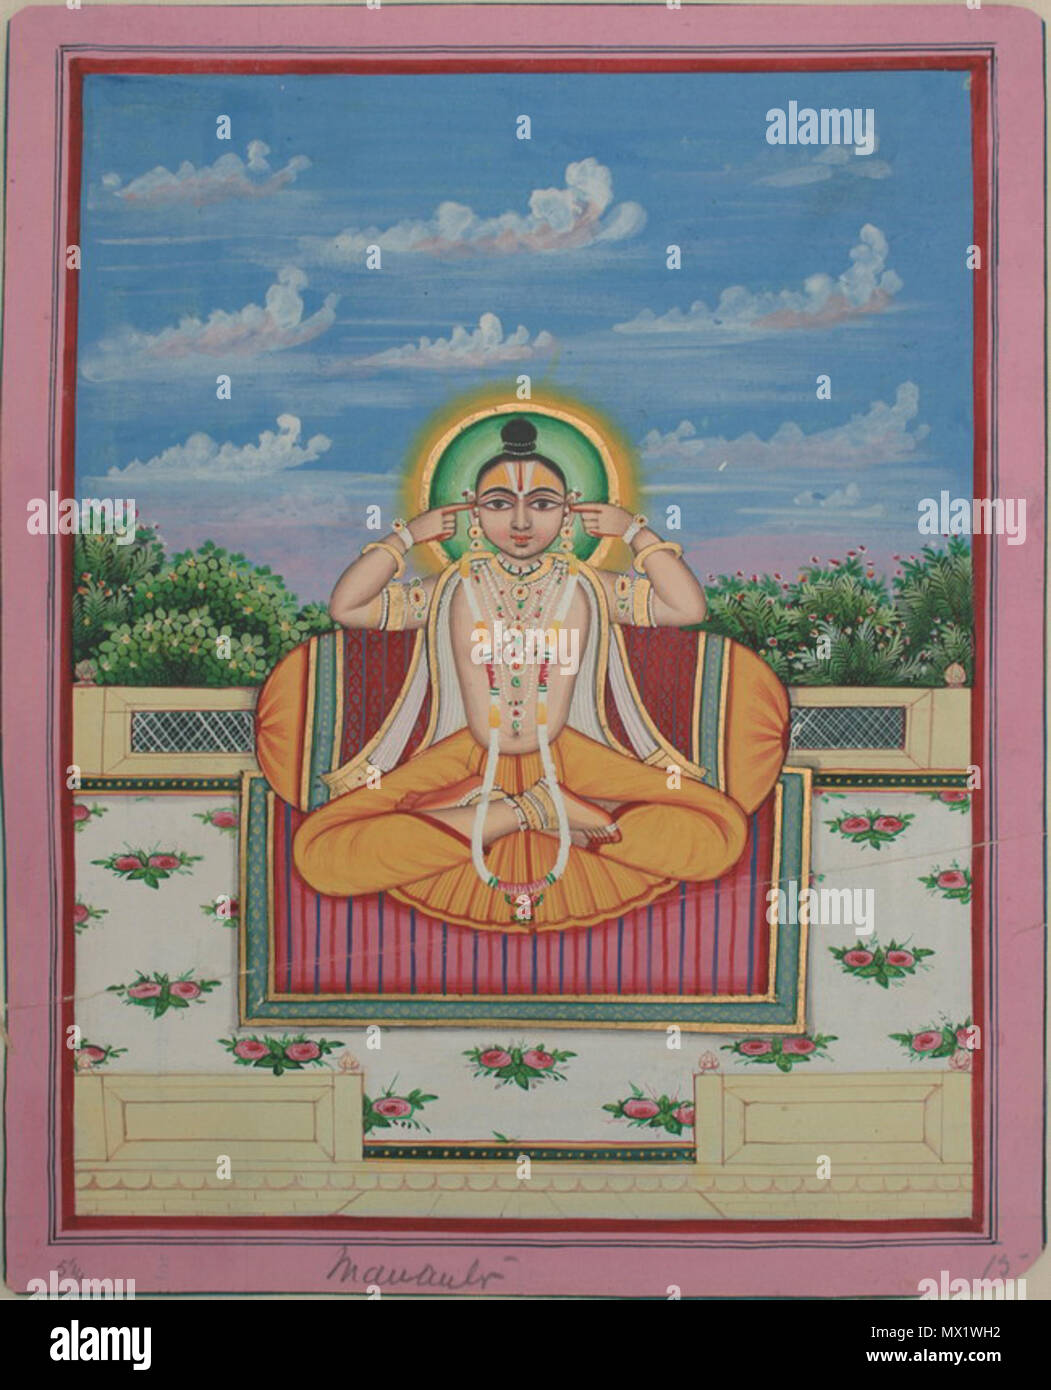 . From a series of Vishnu Avataras: Yagya. Jaipur, circa 1860. Opaque watercolour with gold on used ledger paper. 24.1 x 19.2cm This avatara is belongs to the classifications extending beyond the Dasavataras of 10. The Contemporary English inscriptions front and back must be the original owner's interpretation of Manvantara. Millions of years ago during the time of Svayambhuva Manvantara, Indra (king of the gods) was absent so Vishnu took the form of Yajna to hold his post. Yajna is shown using a mudra (hand gesture) which blocks the sense of hearing similar to yoni mudra which blocks all five Stock Photo